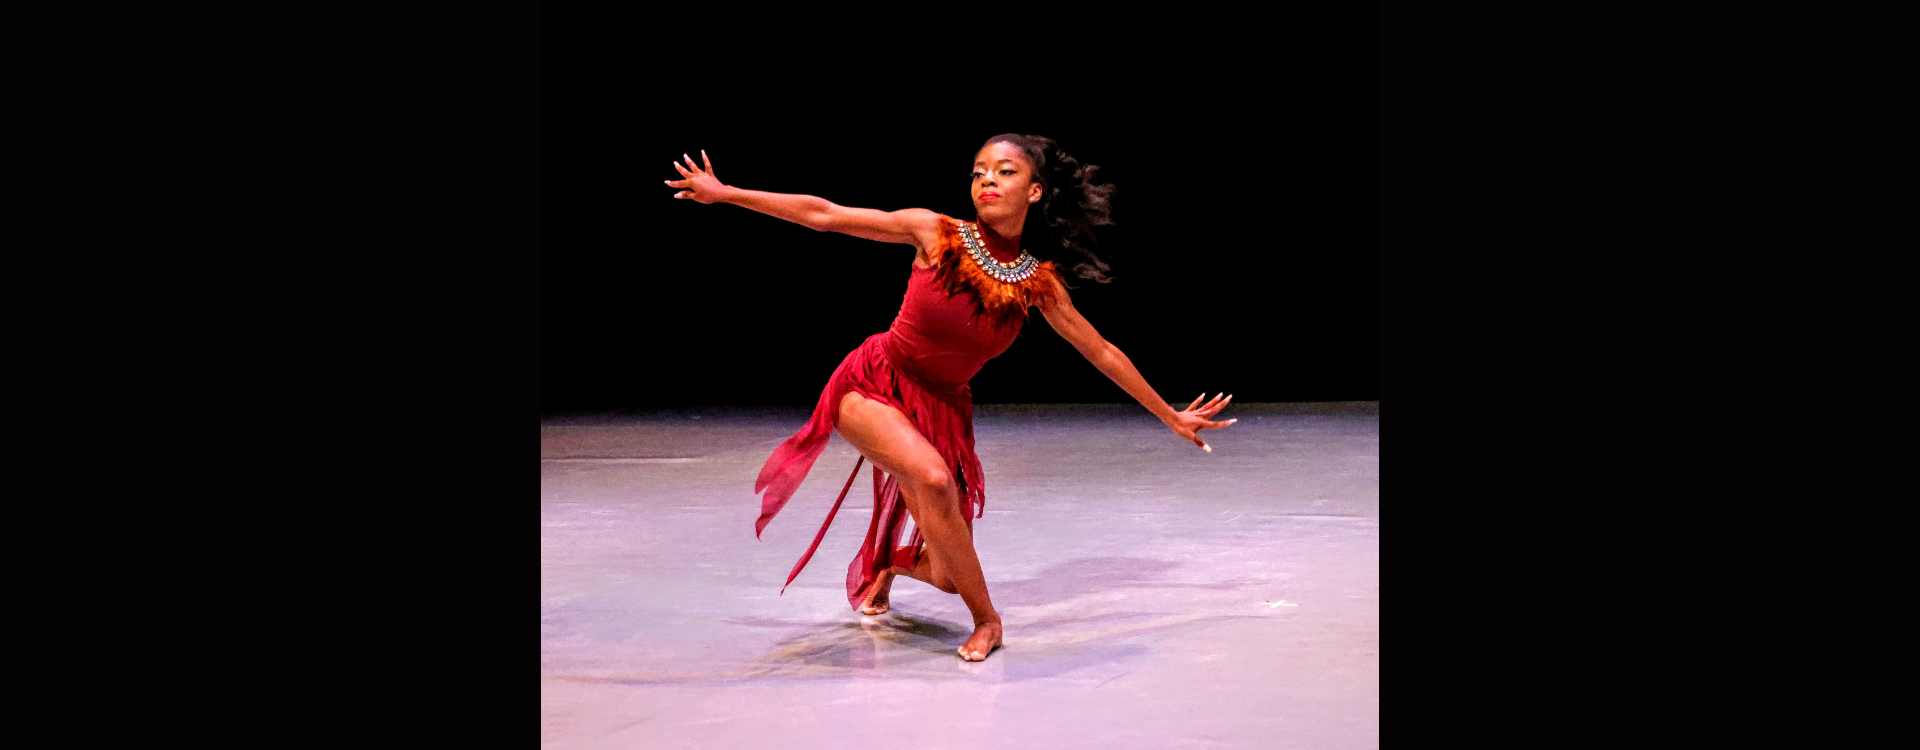 A woman in a red dress is dancing on stage.